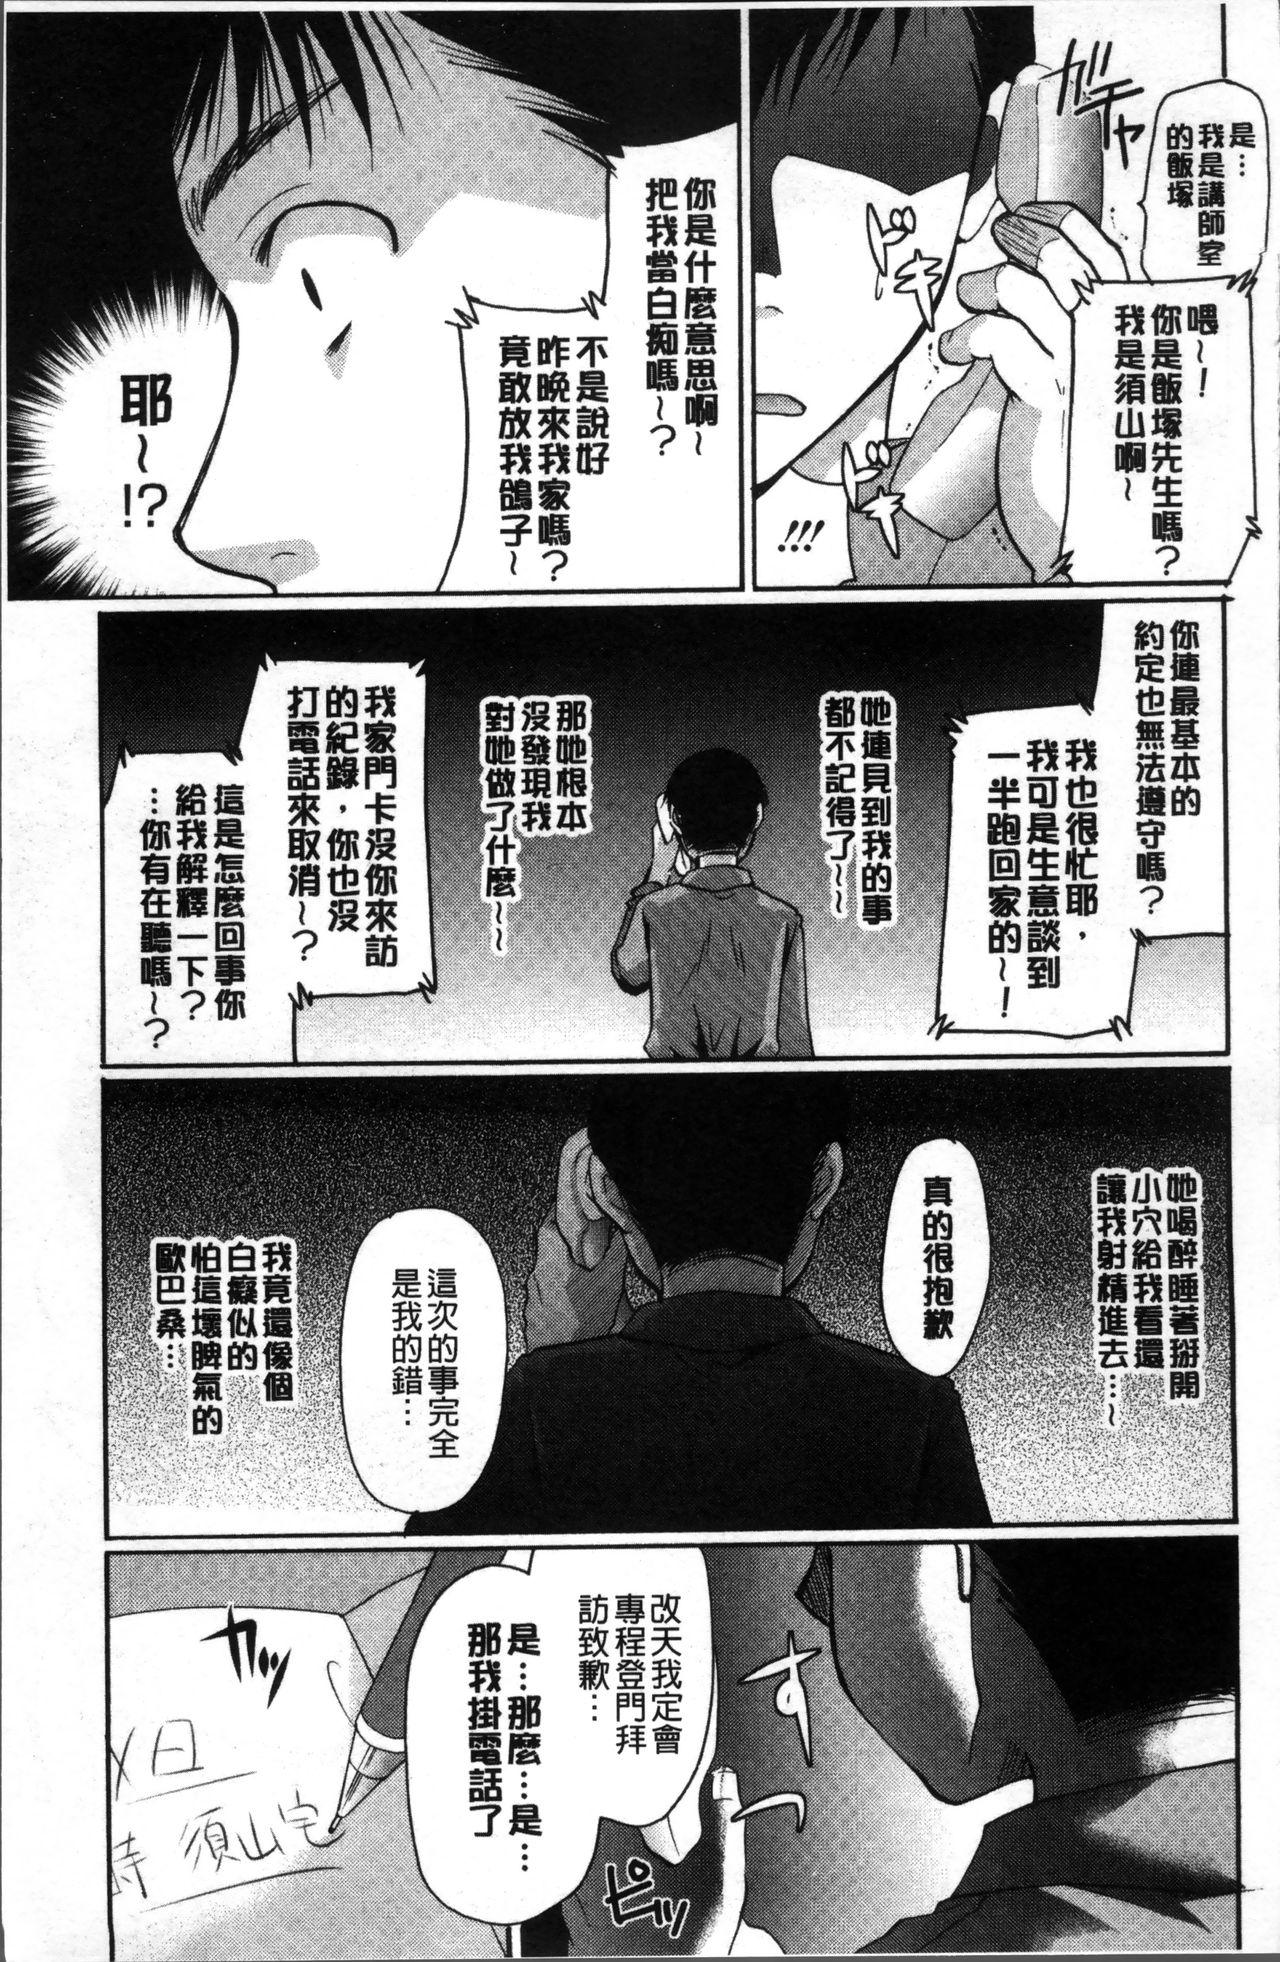 King will prefer not to have any kind or Johnny (Comic Penguin Club Pirate Edition August 2008) Chinese translation (21 pages)-第1章-图片86